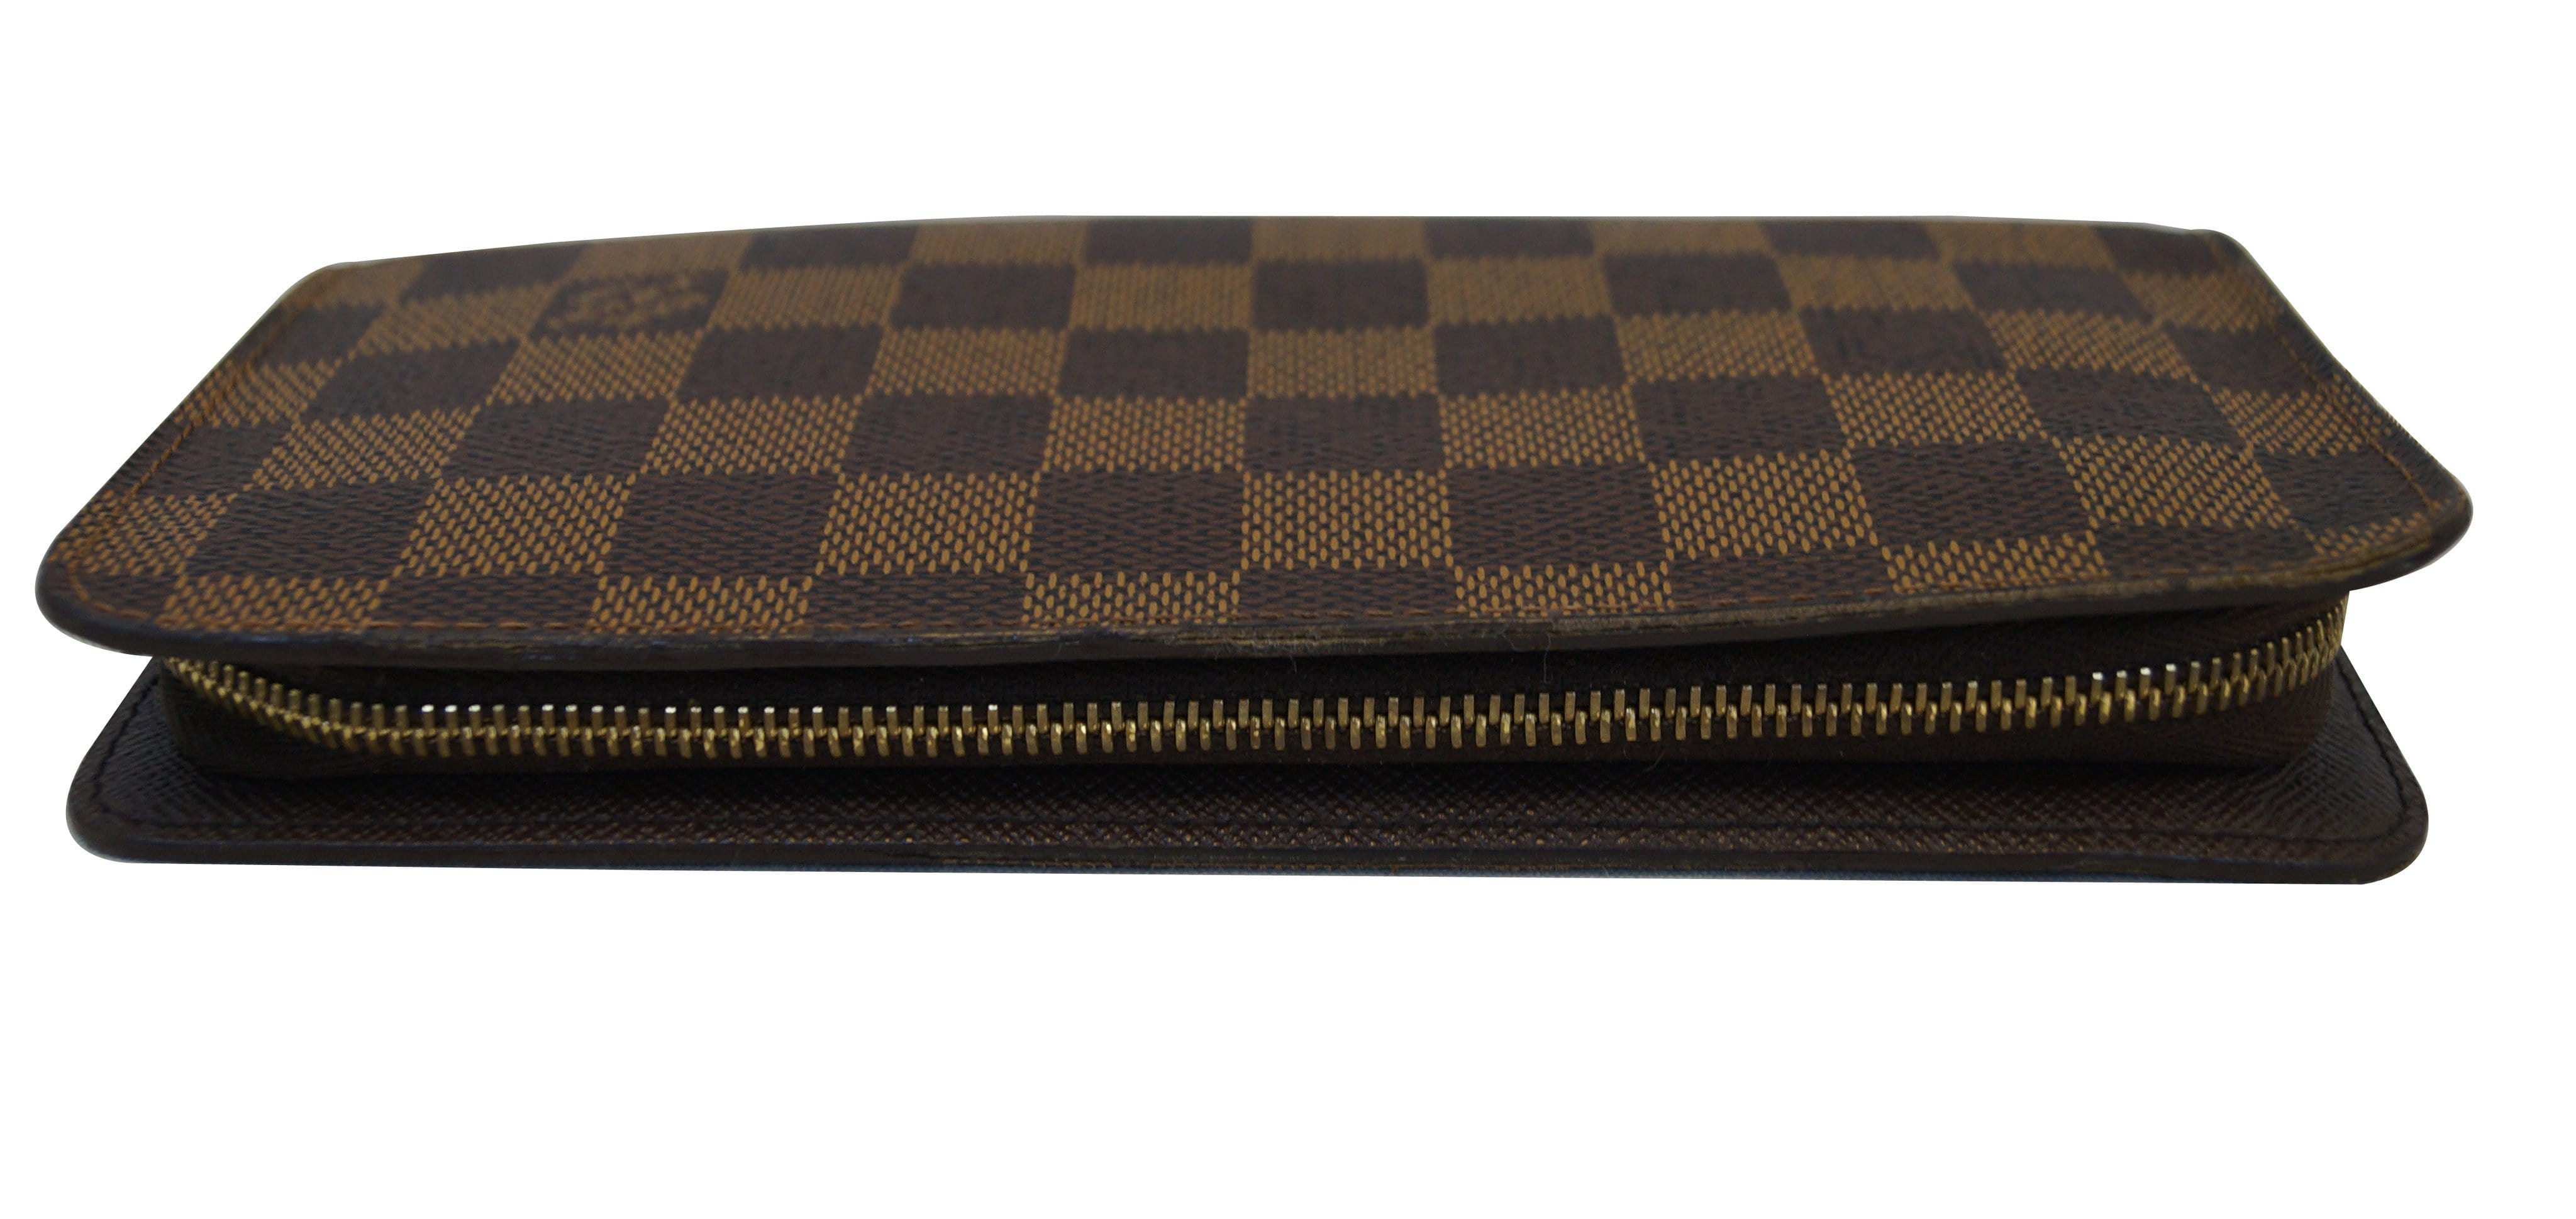 Leather wallet Louis Vuitton Beige in Leather - 27476898